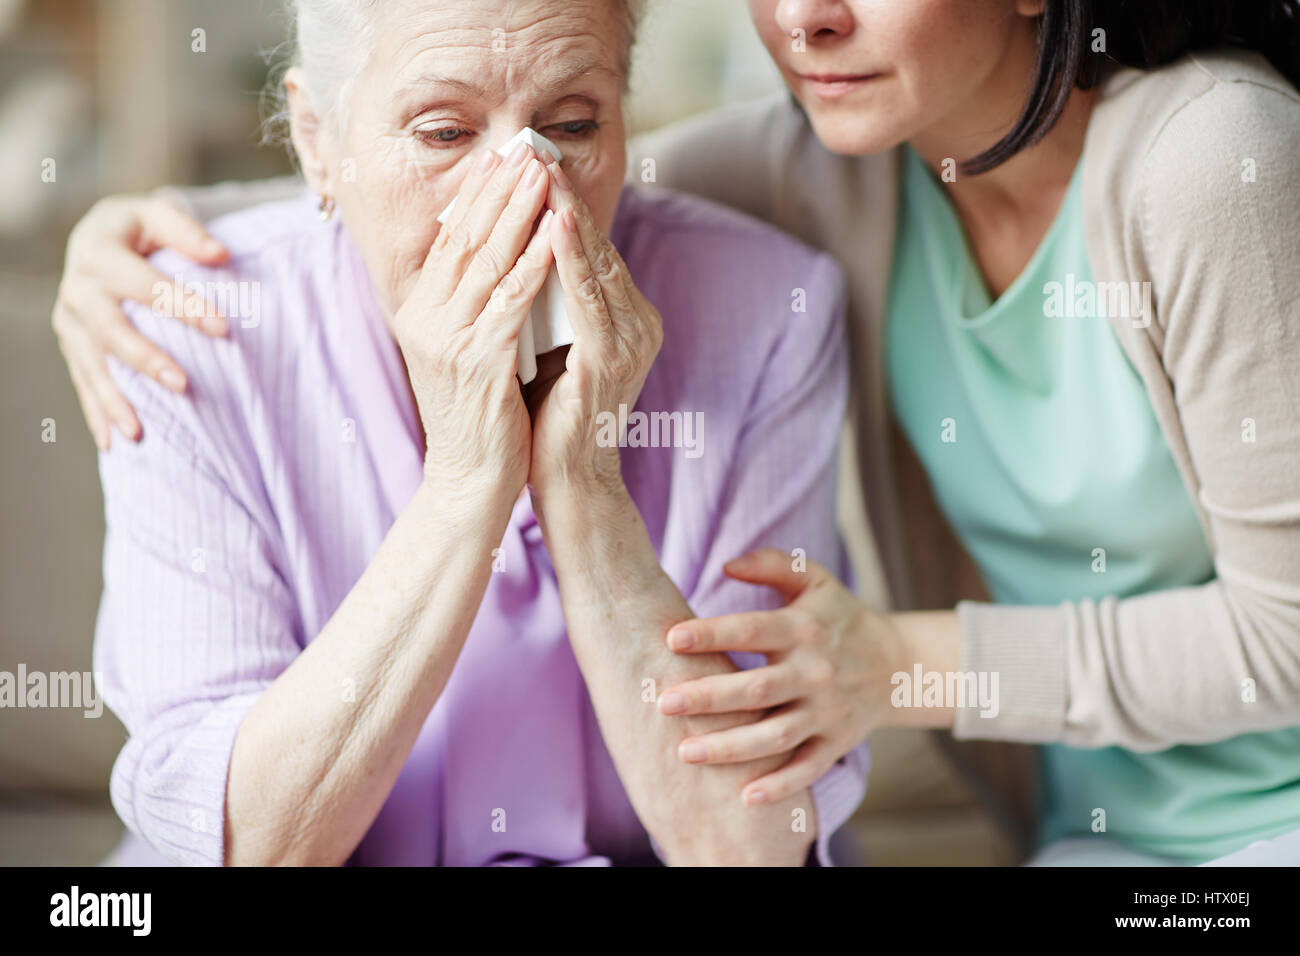 Elderly woman crying and young female embracing her Stock Photo